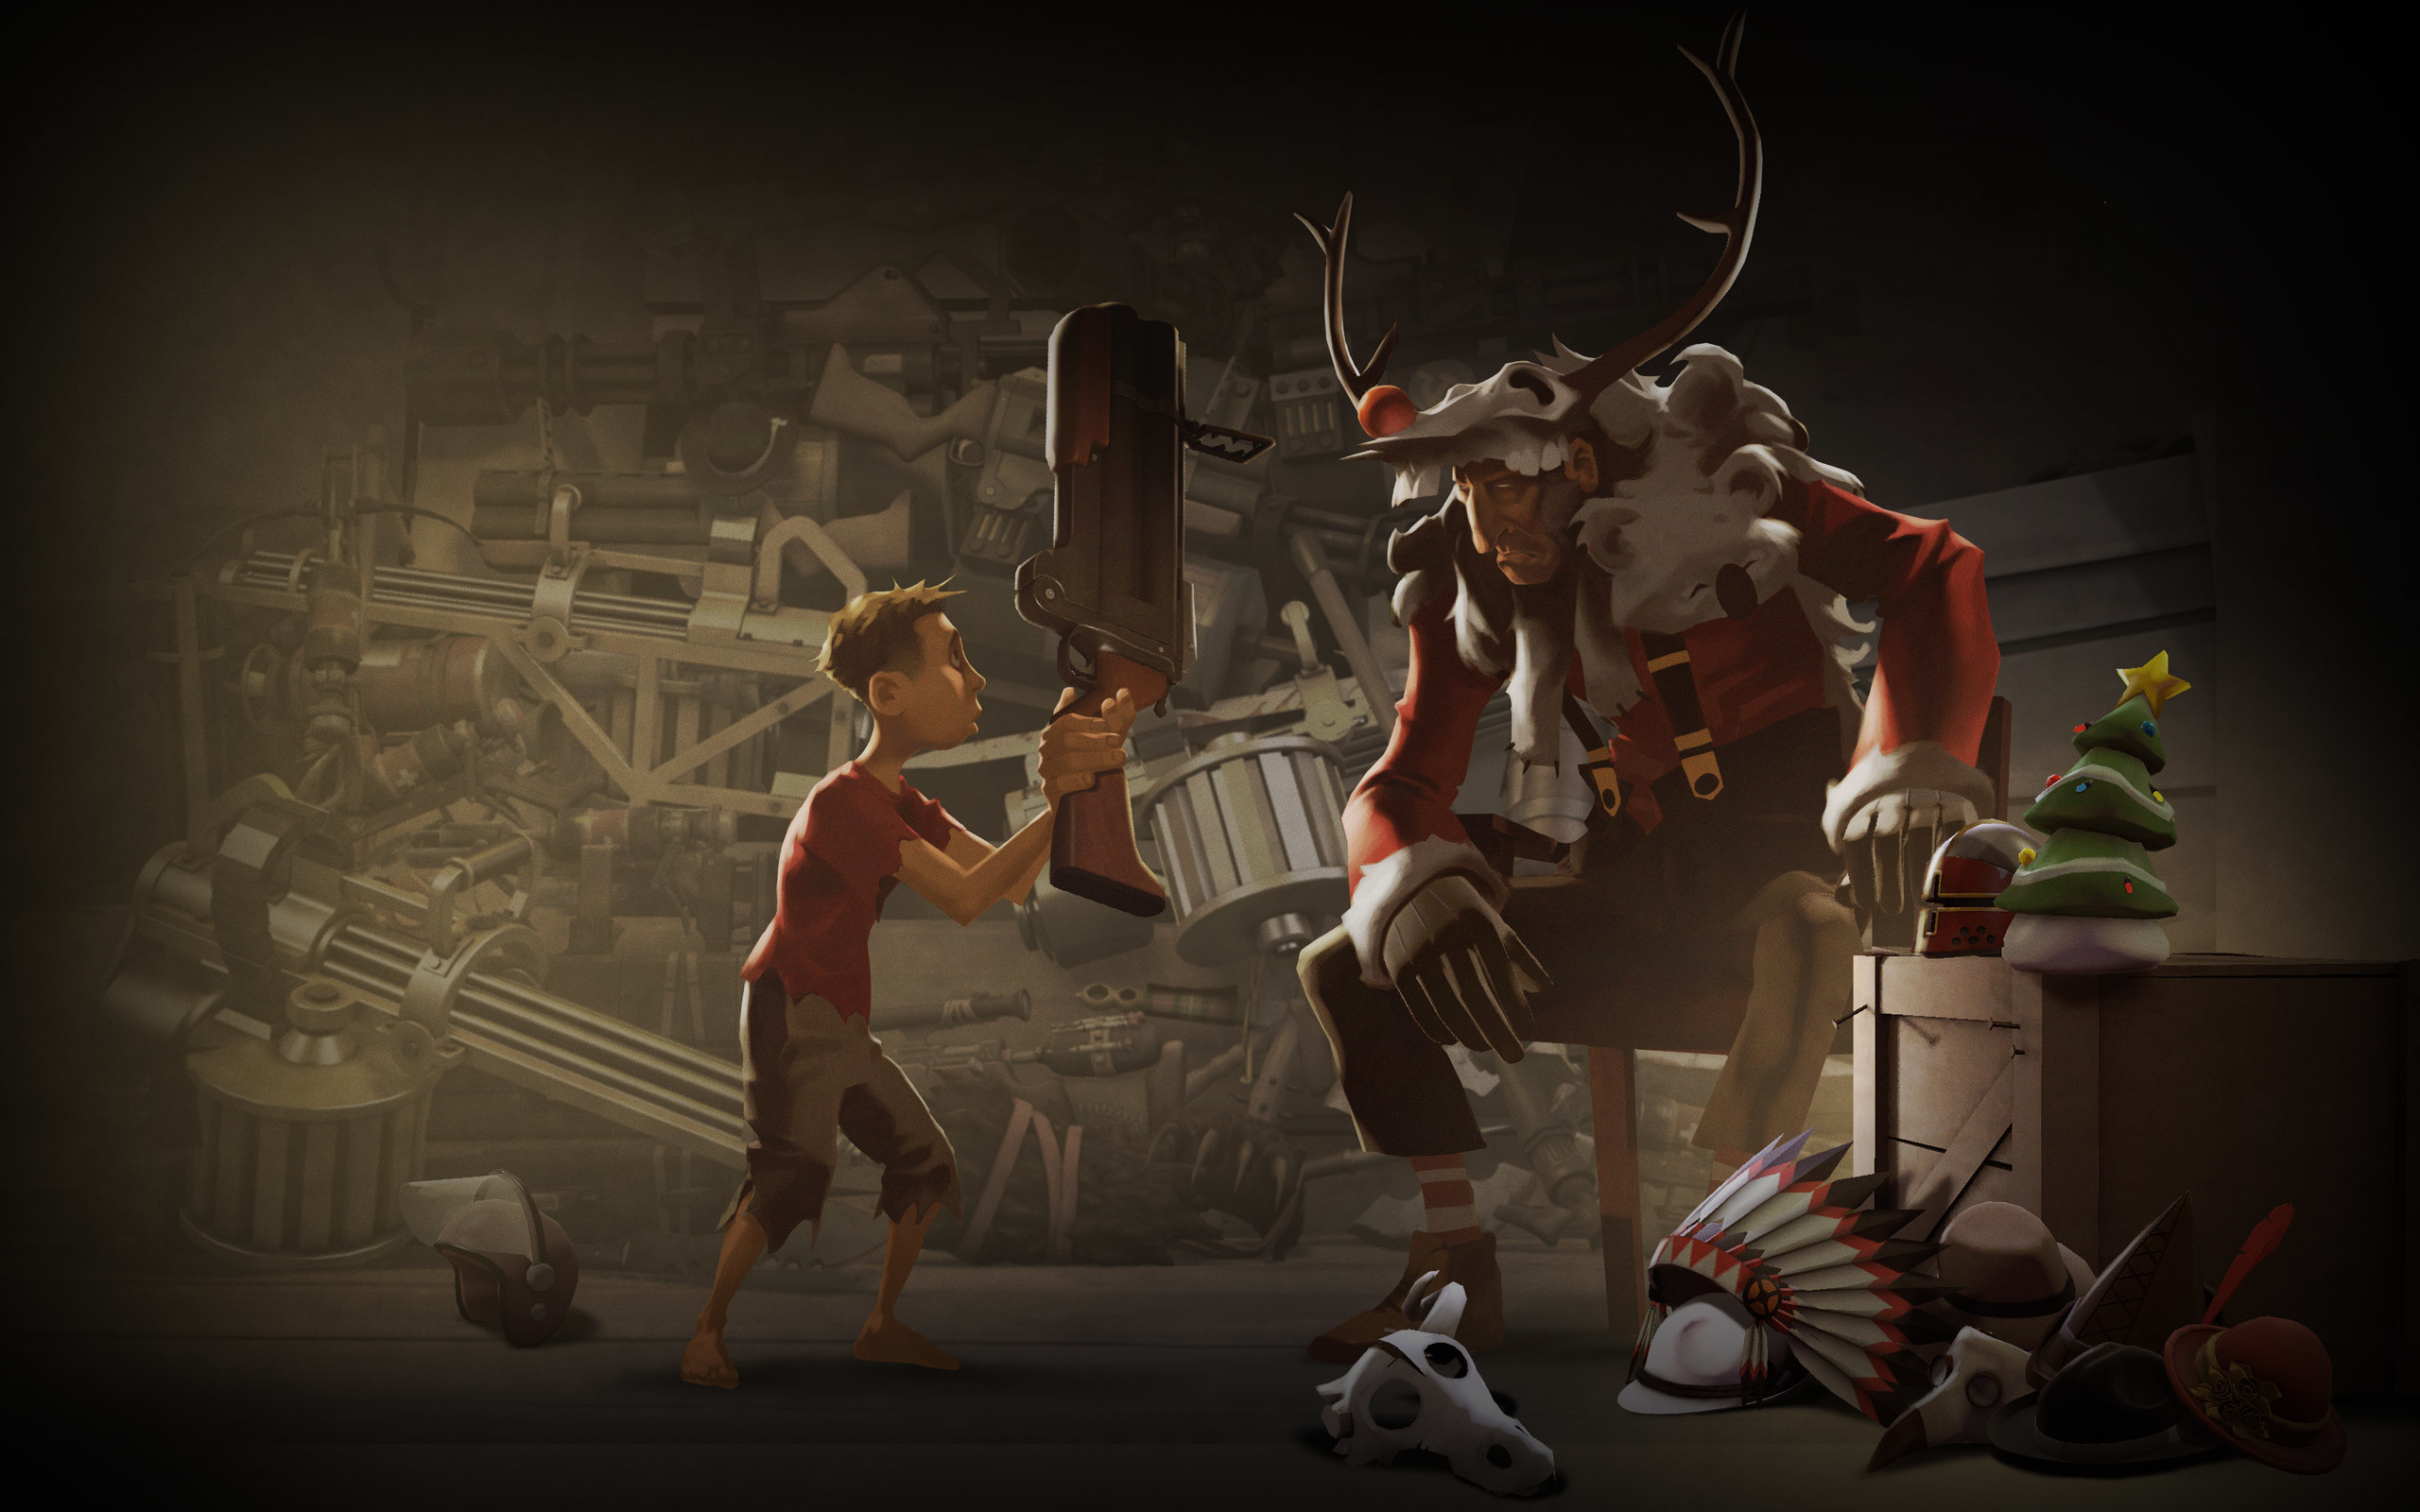 2560x1600 Download the Team Fortress Christmas Wallpaper, Team Fortress .